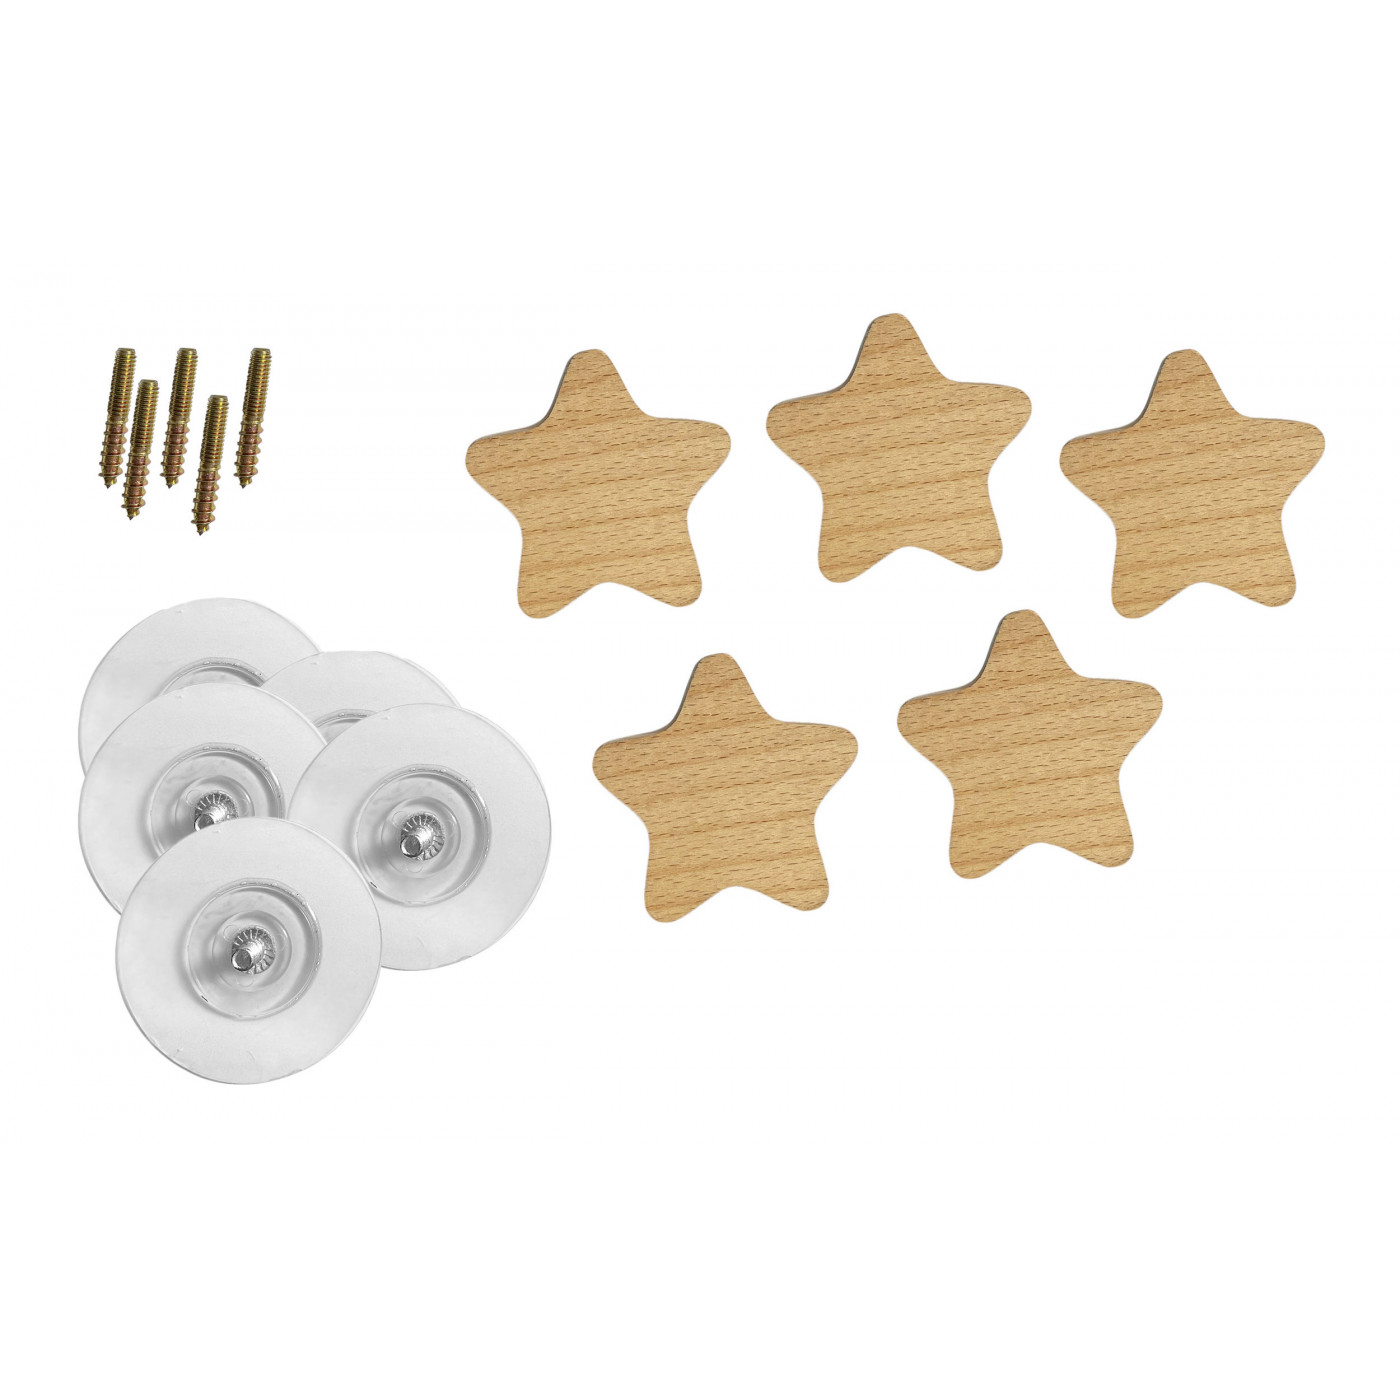 Set of 5 wooden clothes hooks (star) for childrens rooms and